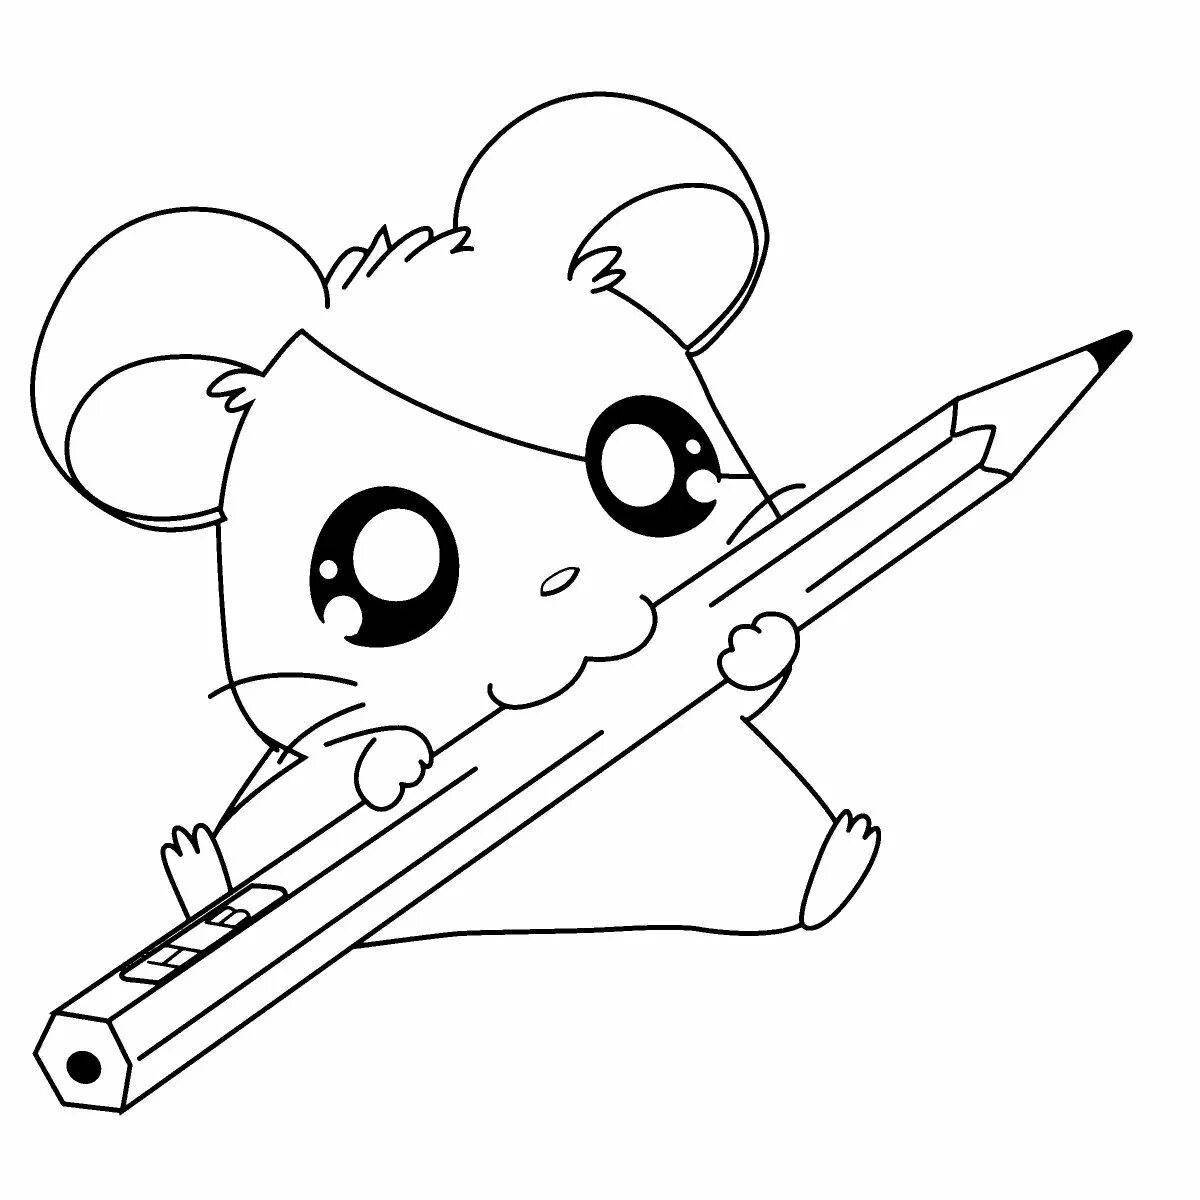 The cutest in the world playful coloring page